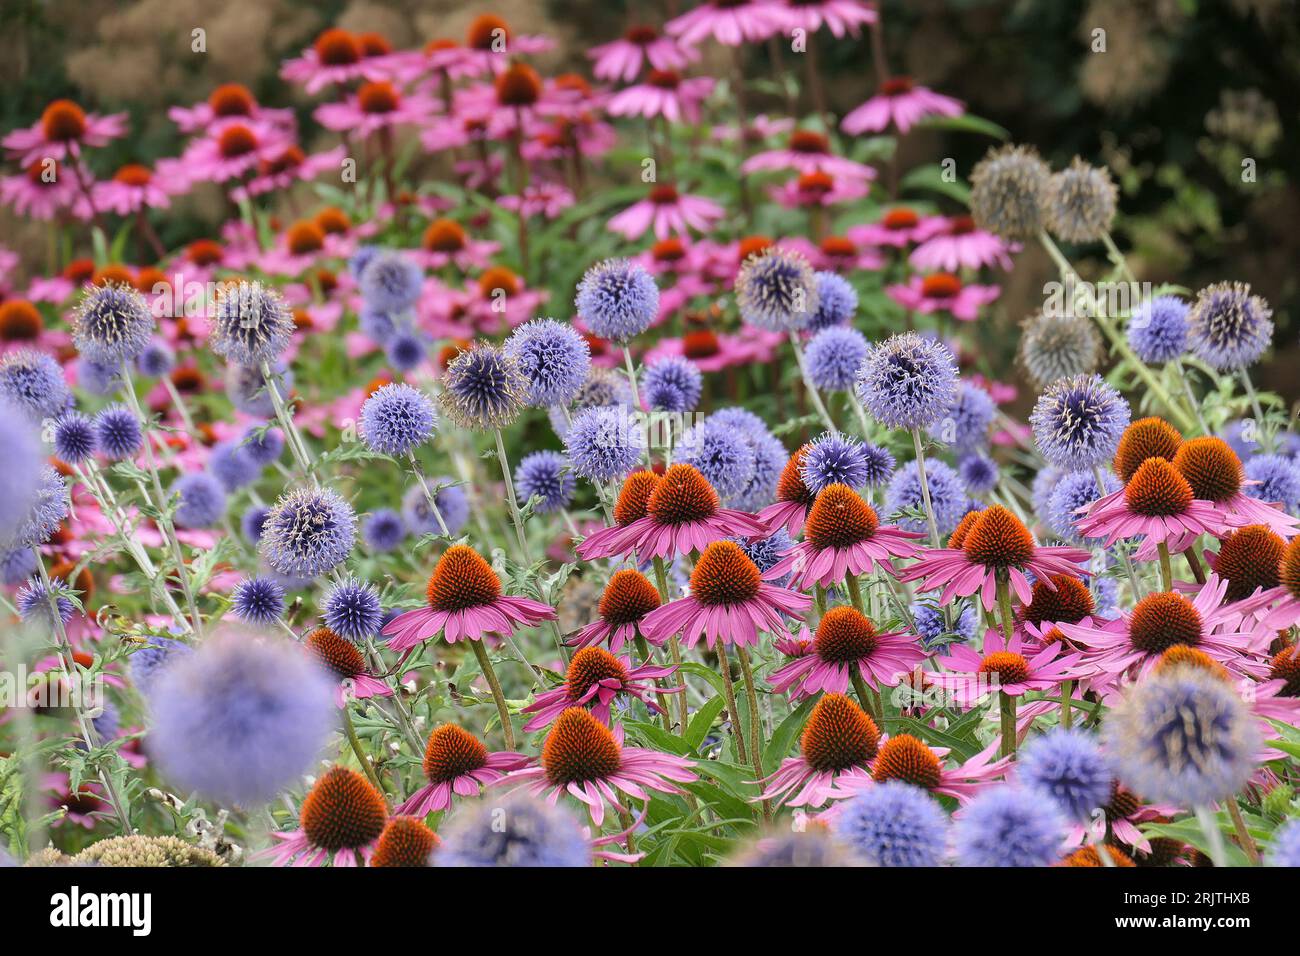 Closeup of the summer flowering planting combination of the herbaceous plants Echinacea purpurea and Echinops bannaticus blue globe garden border. Stock Photo